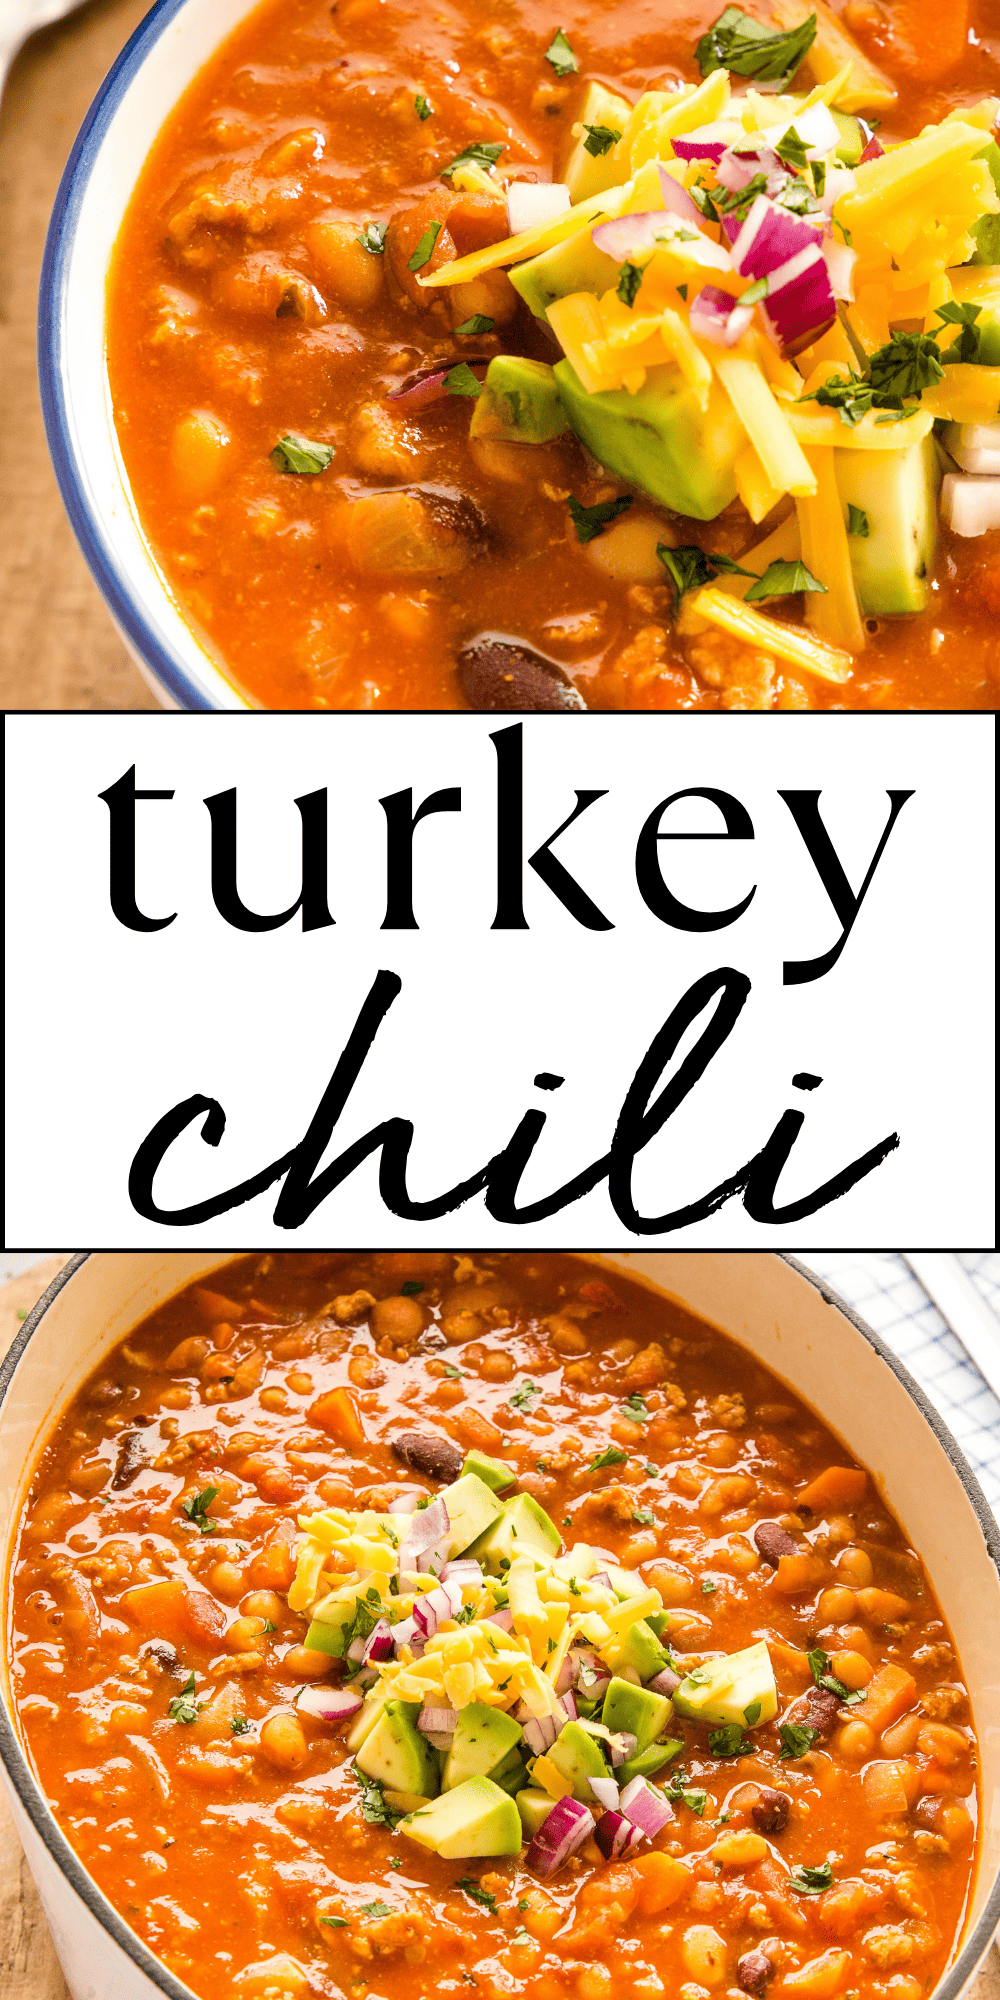 This Turkey Chili recipe is healthy, hearty and filling and packed with lean ground turkey, veggies, and beans! It's an easy-to-make family meal that's ready in 30 minutes! Follow our tips to make the best ground turkey chili on the stovetop, in the Instant Pot or in the Slow Cooker. Recipe from thebusybaker.ca! #turkeychili #easychili #healthychili #easymeal #dinner #weeknightmeal #familymeal via @busybakerblog